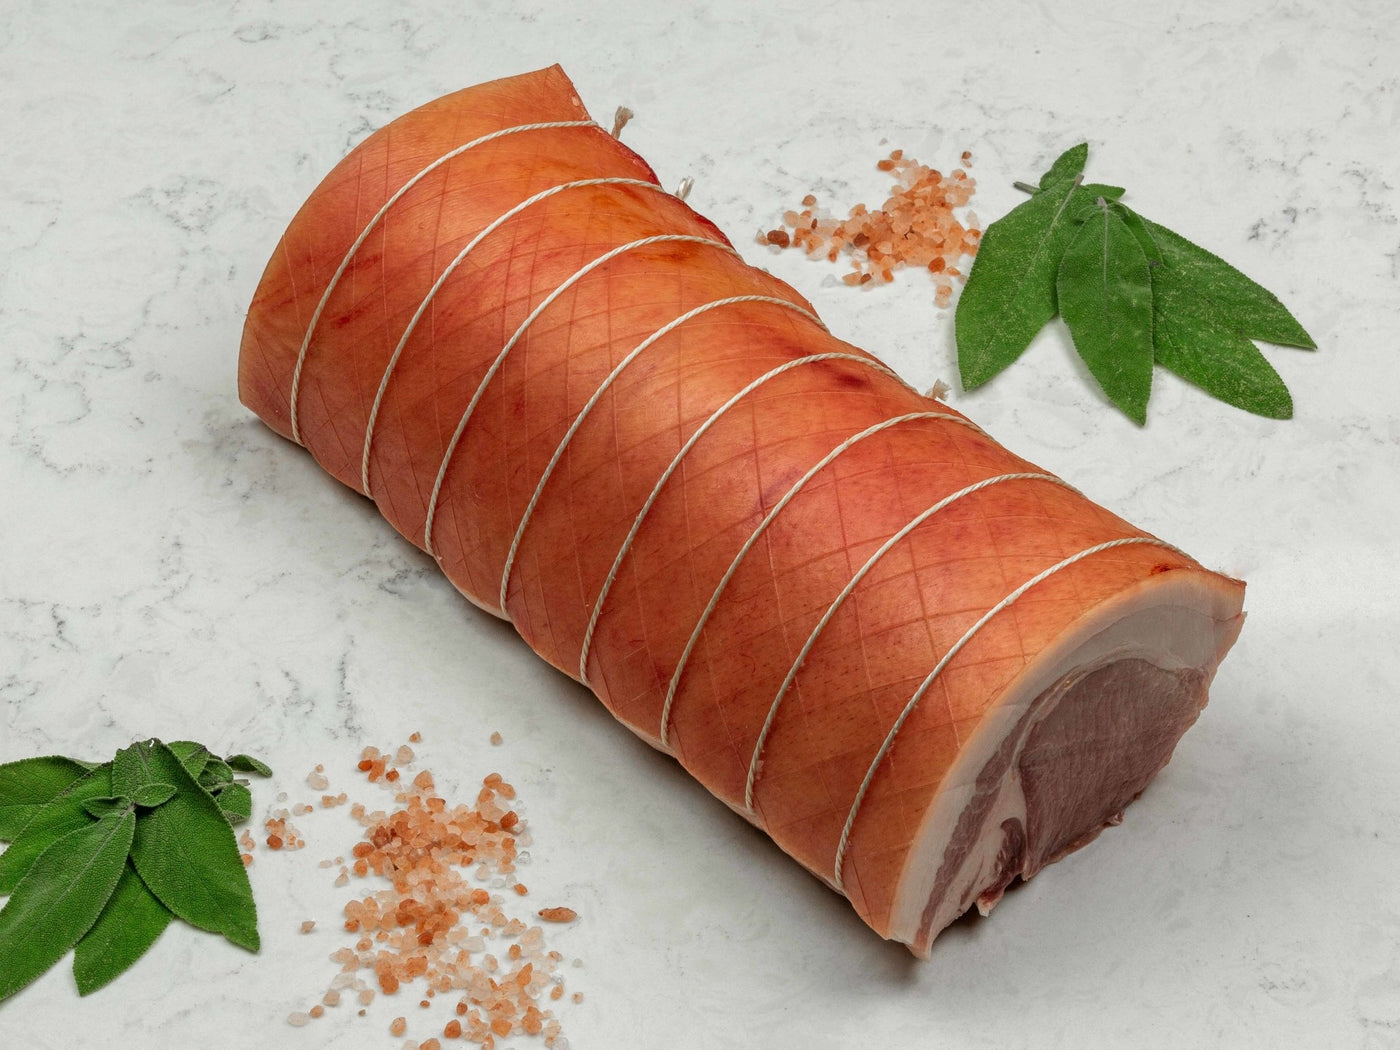 7 Day Dry-Aged, Free Range Rolled Pork Loin - Thomas Joseph Butchery - Ethical Dry-Aged Meat The Best Steak UK Thomas Joseph Butchery